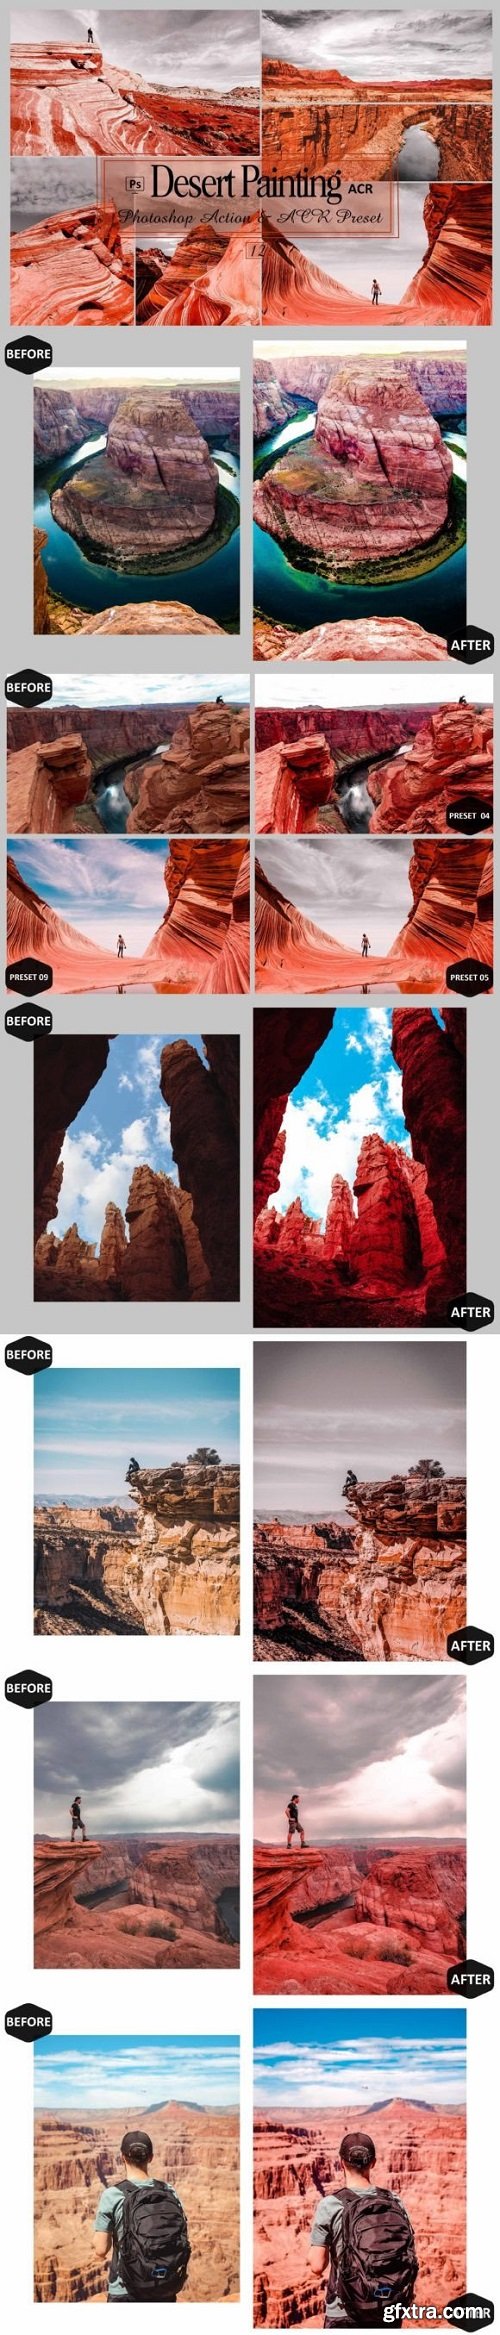 12 Desert Painting Photoshop Actions